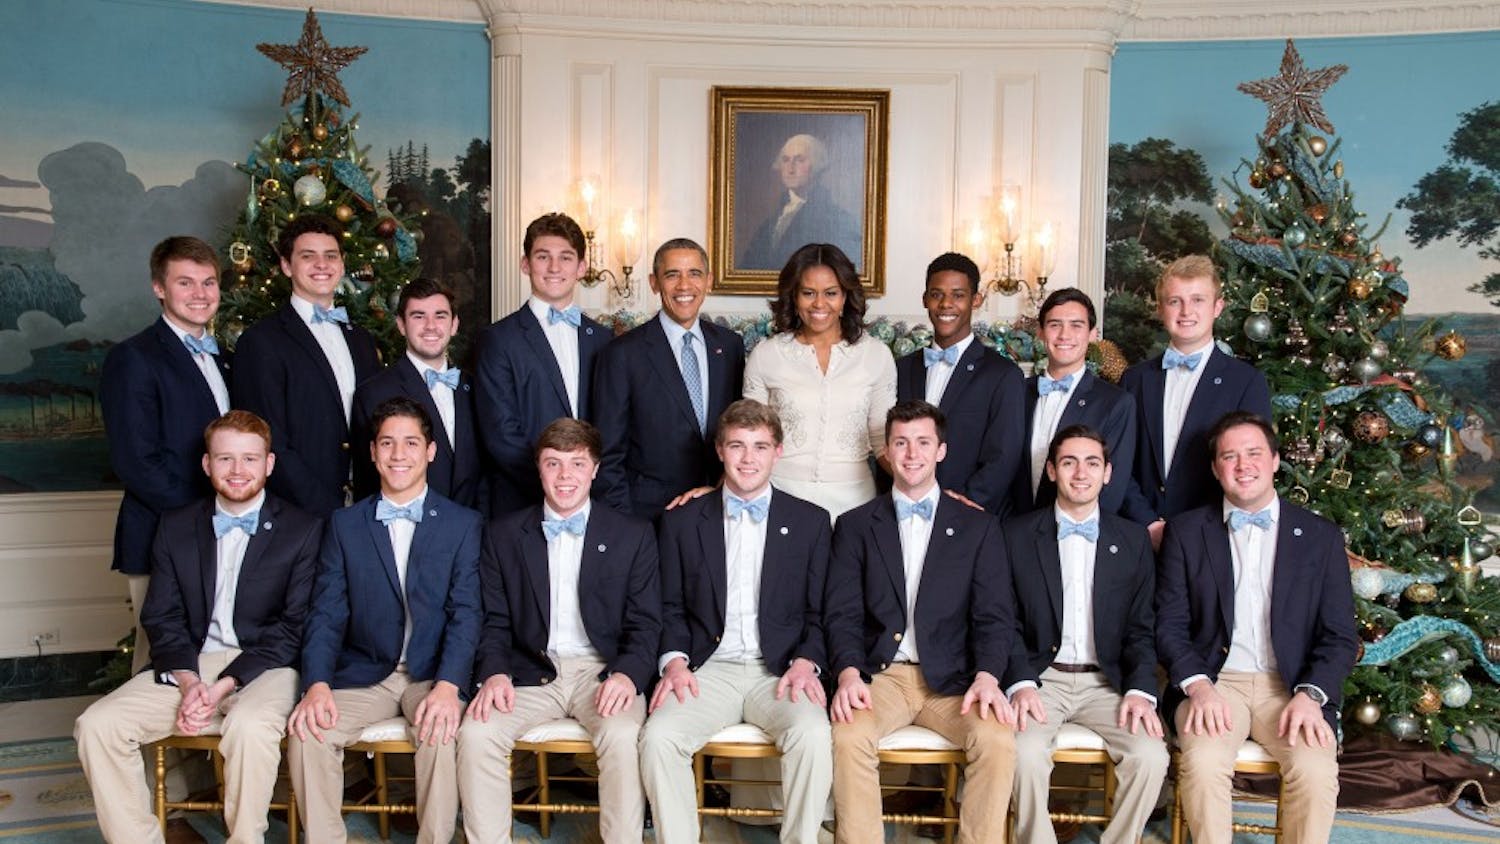 President Barack Obama and First Lady Michelle Obama join the UNC (University of North Carolina) Clef Hangers for a group photo and listen to them perform in the Diplomatic Reception Room prior to Christmas holiday EOP Reception #1 at the White House, Dec. 15, 2015. (Official White House Photo by Chuck Kennedy)This photograph is provided by THE WHITE HOUSE as a courtesy and may be printed by the subject(s) in the photograph for personal use only. The photograph may not be manipulated in any way and may not otherwise be reproduced, disseminated or broadcast, without the written permission of the White House Photo Office. This photograph may not be used in any commercial or political materials, advertisements, emails, products, promotions that in any way suggests approval or endorsement of the President, the First Family, or the White House.